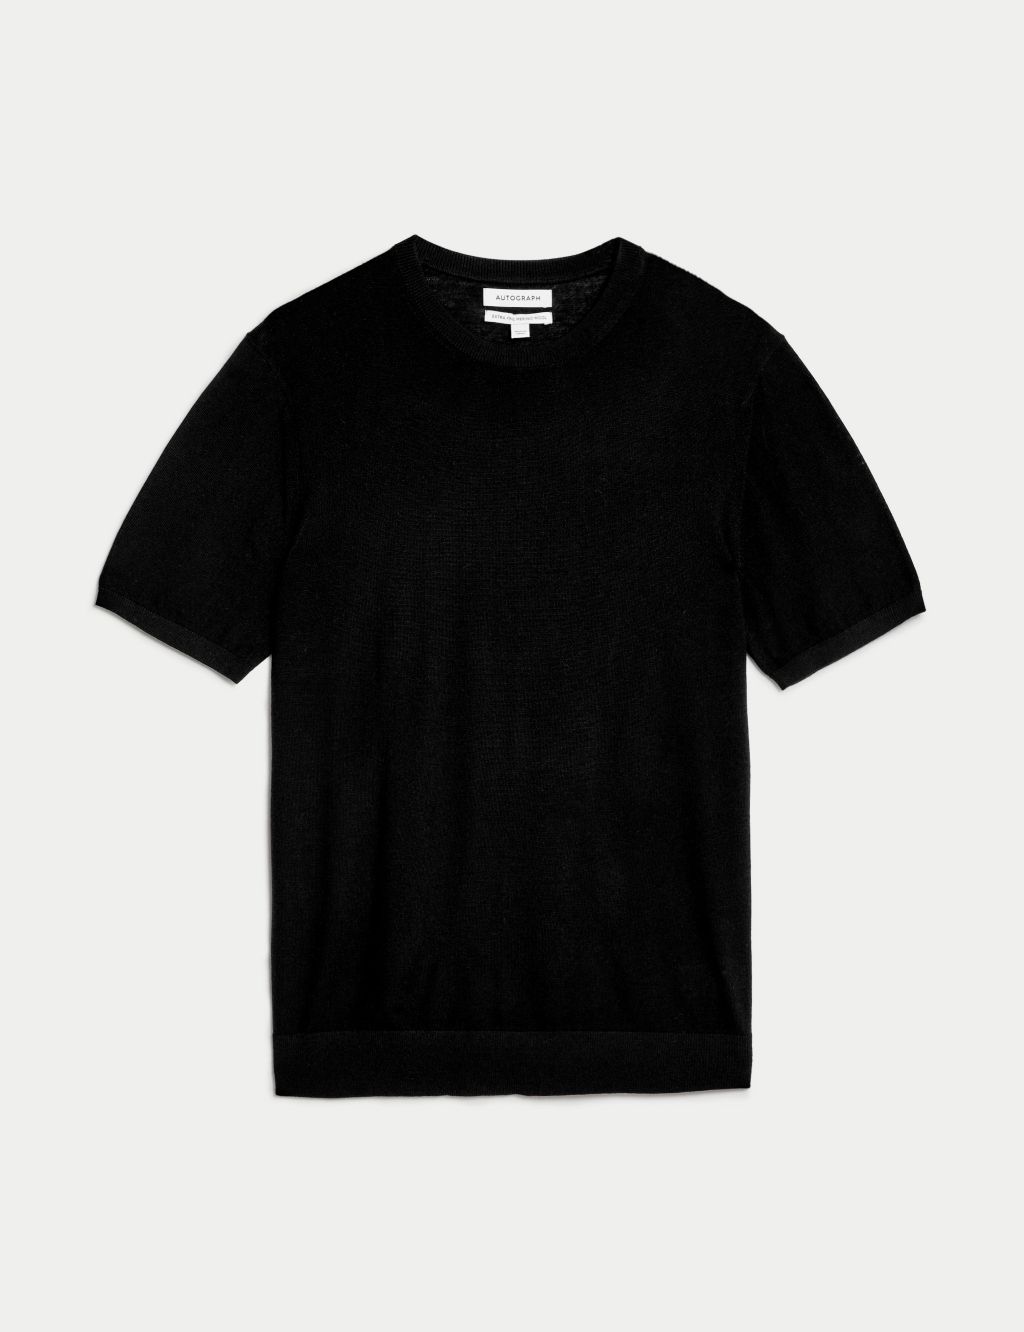 Pure Extra Fine Merino Wool Knitted T-Shirt image 2